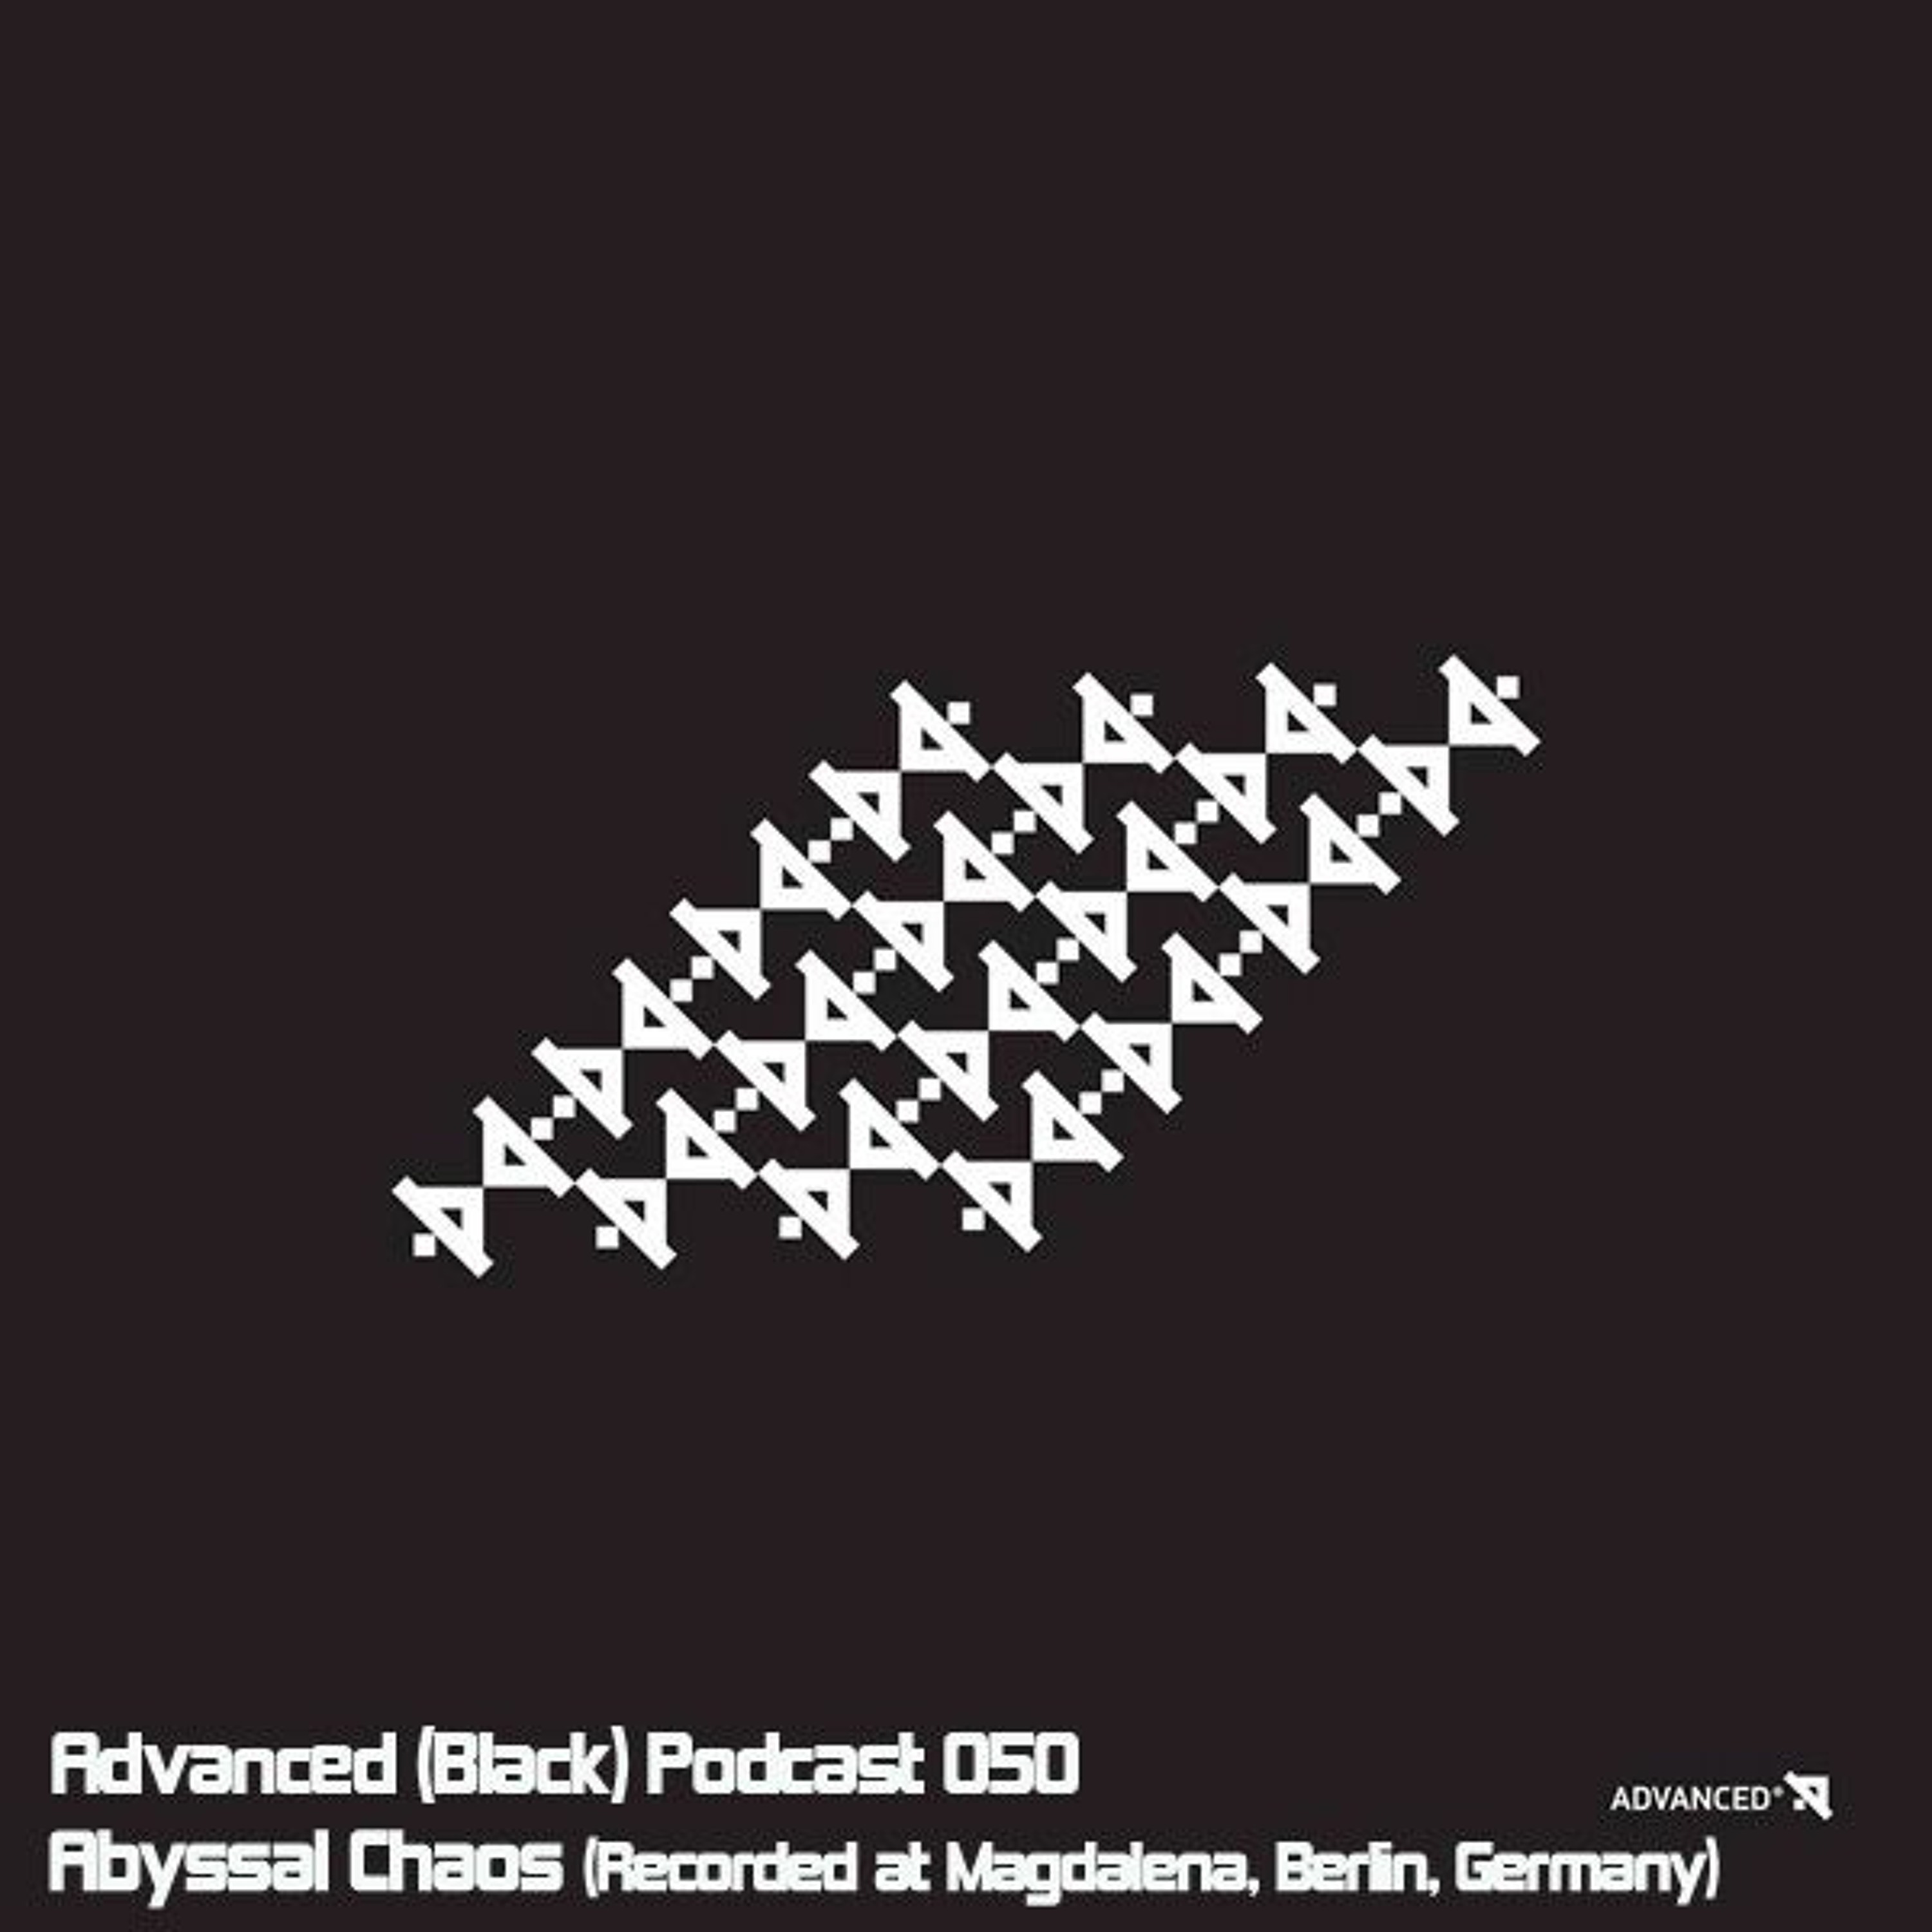 Advanced (Black) Podcast 050 with Abyssal Chaos (Recorded at Magdalena, Berlin, Germany)